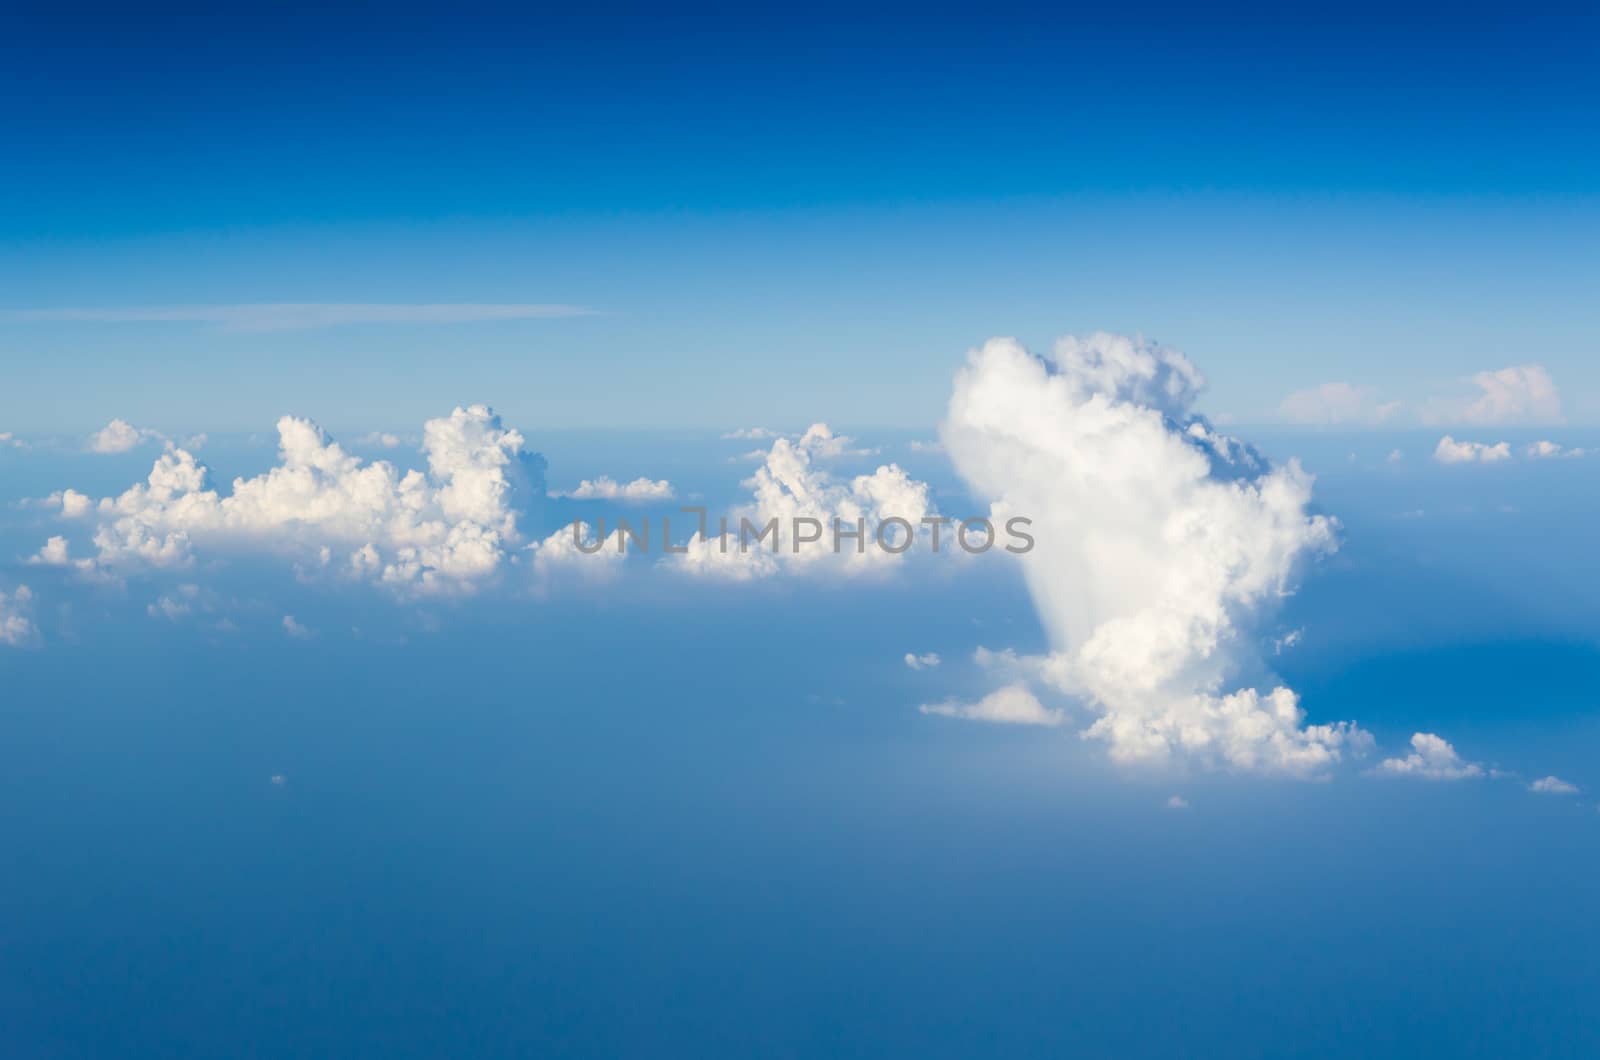 Blue sky and white clouds. view from the window of an airplane flying in the clouds.